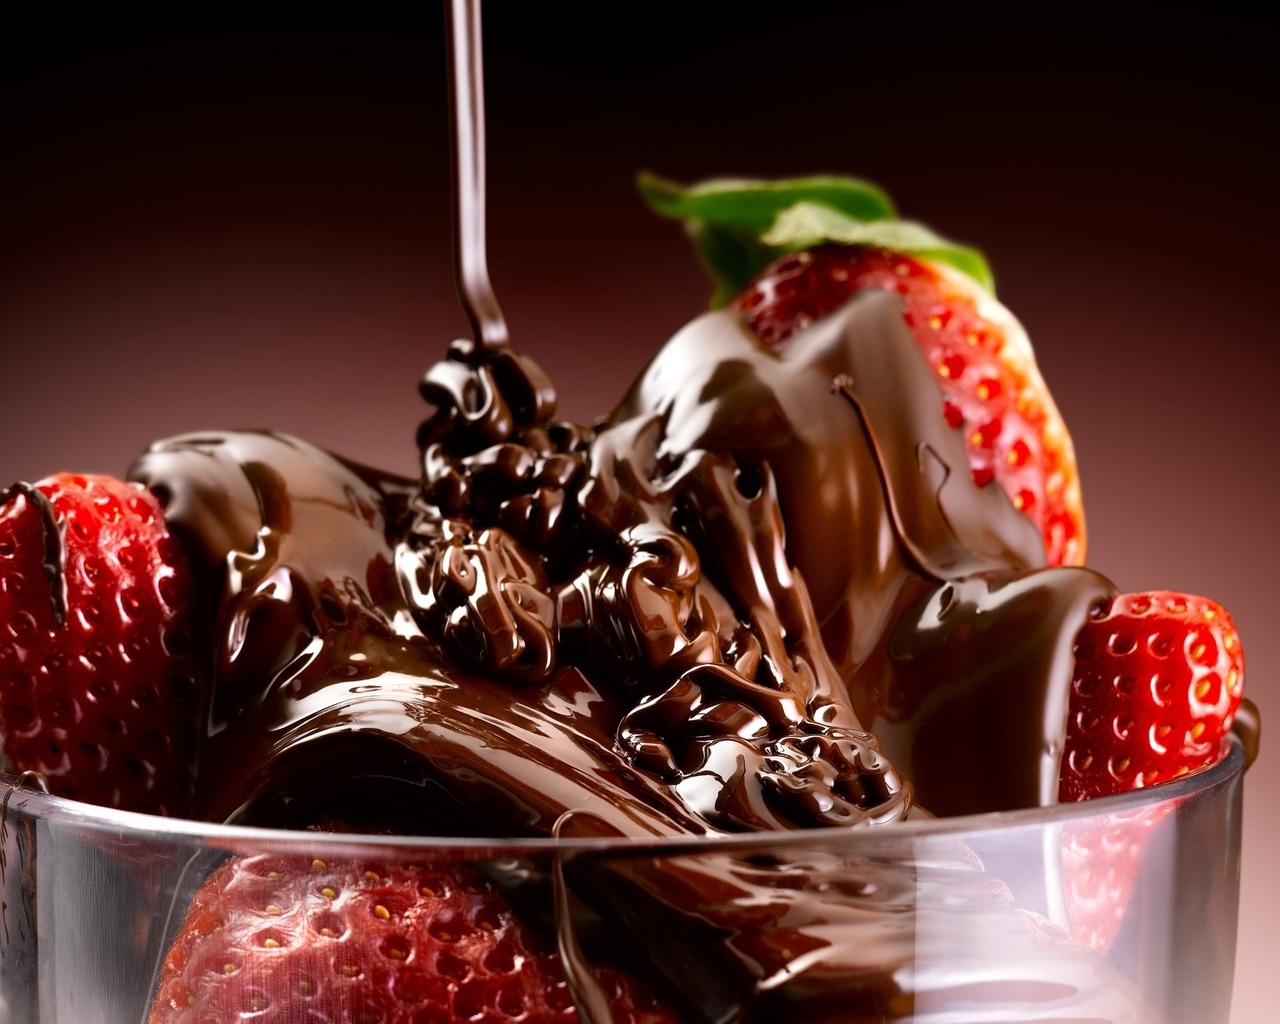 Chocolate and Strawberries for 1280 x 1024 resolution